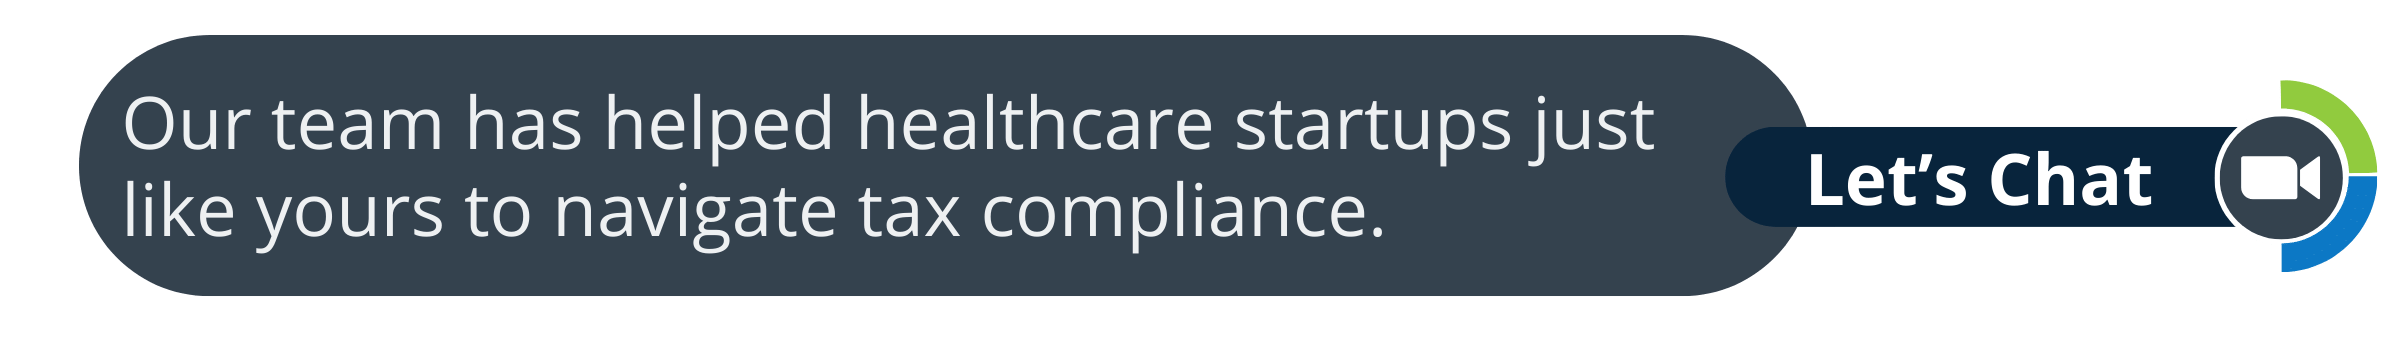 fusion-cpa-tax-compliance-for-healthcare-startups